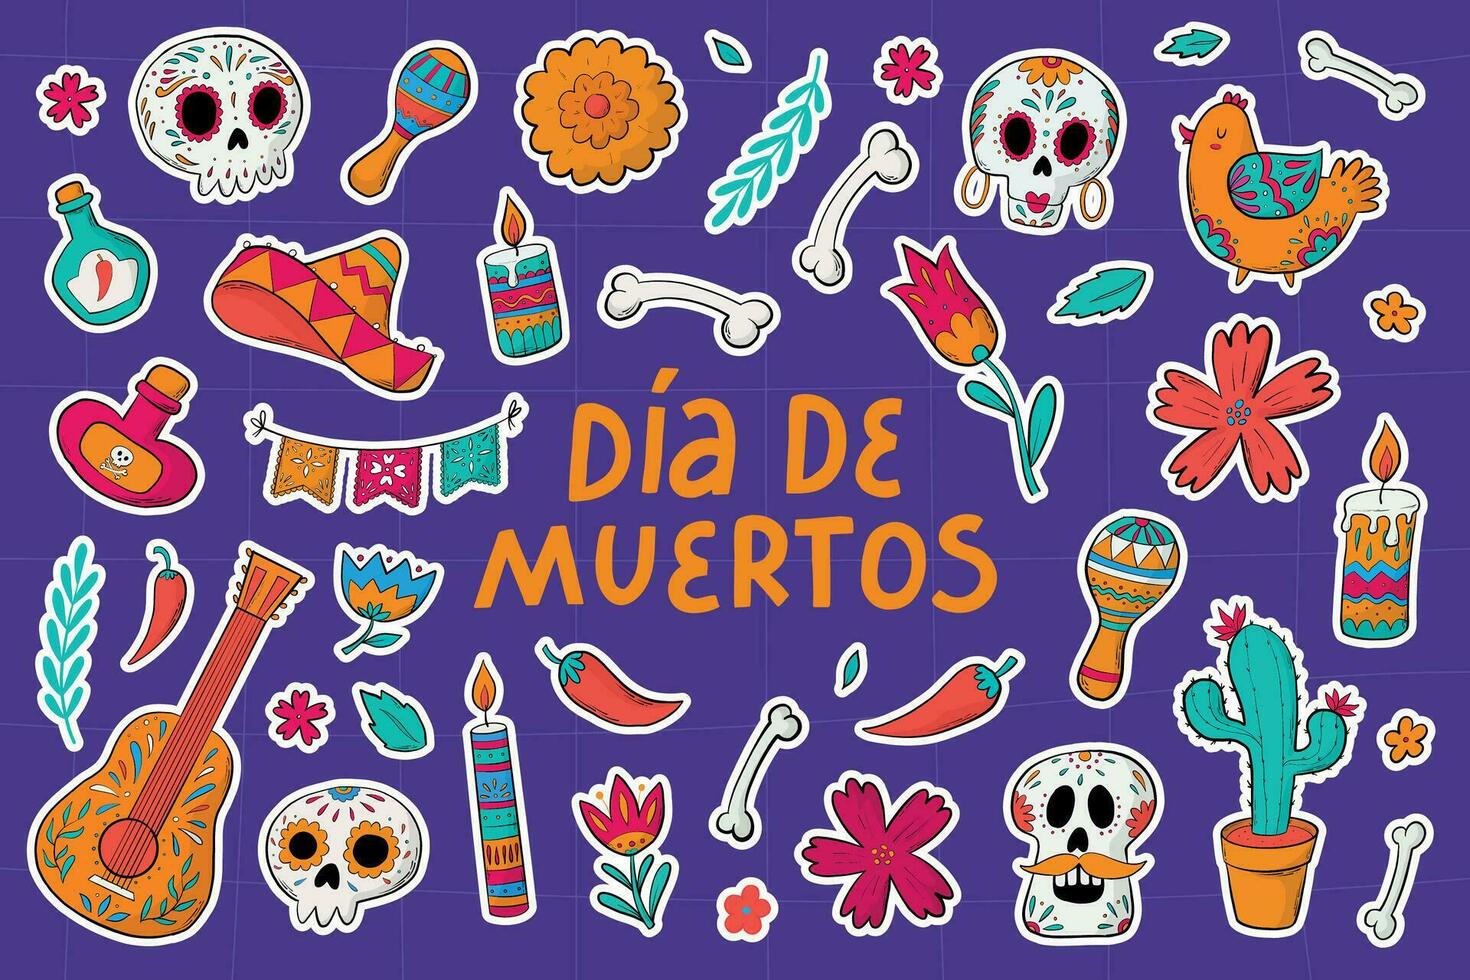 day of the dead doodles, pre made stickers with white edge, cartoon elements for prints, cards, stationary, planners, sublimation, etc. EPS 10 vector